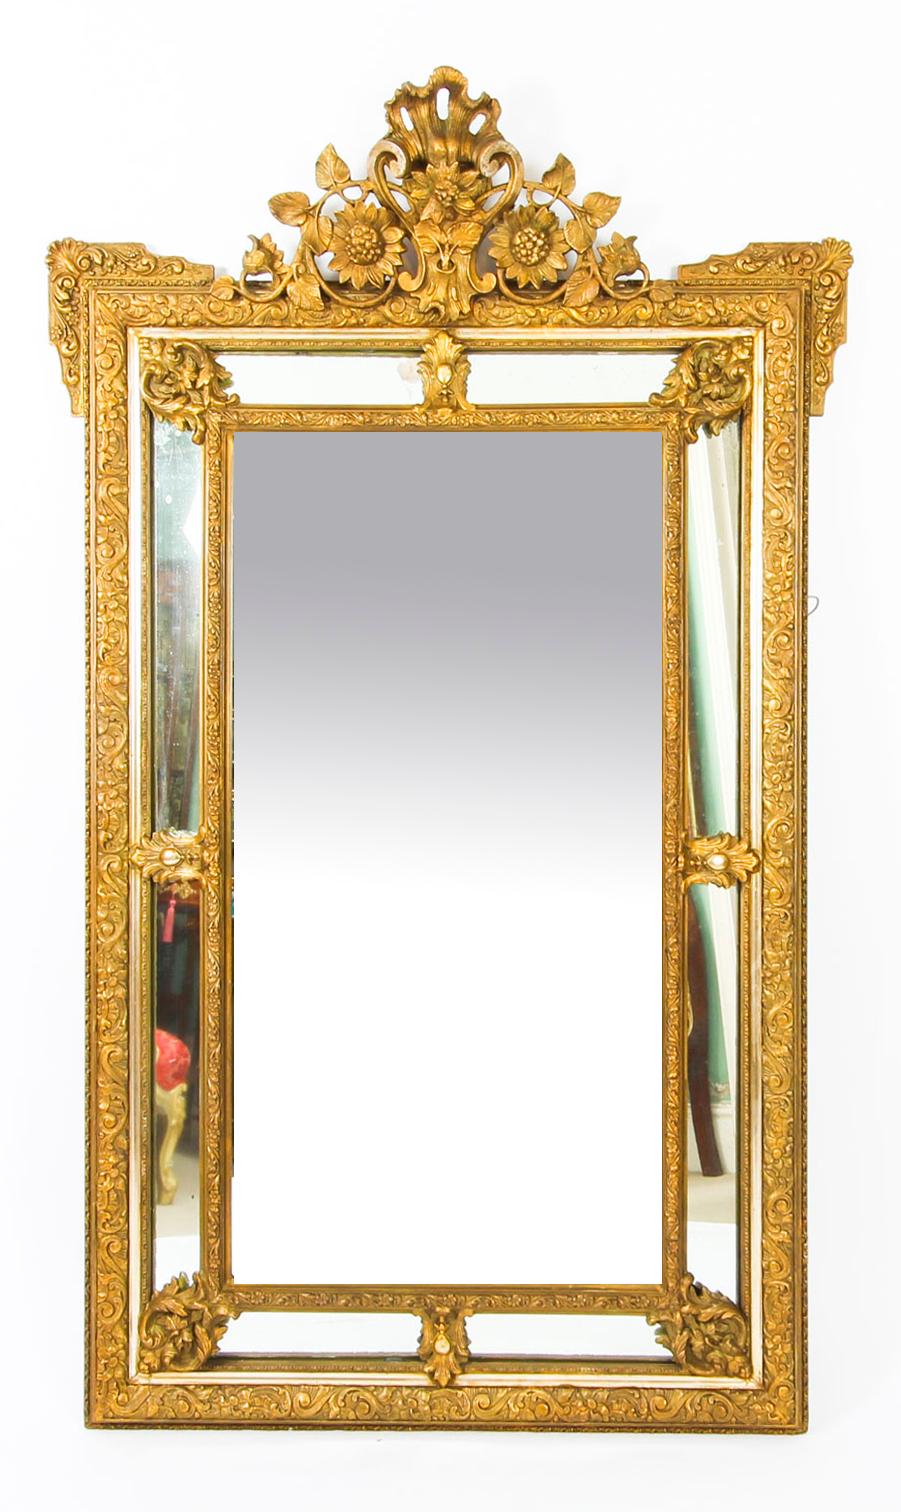 Antique French Giltwood Overmantel Louis Revival Mirror, 19th Century For Sale 5